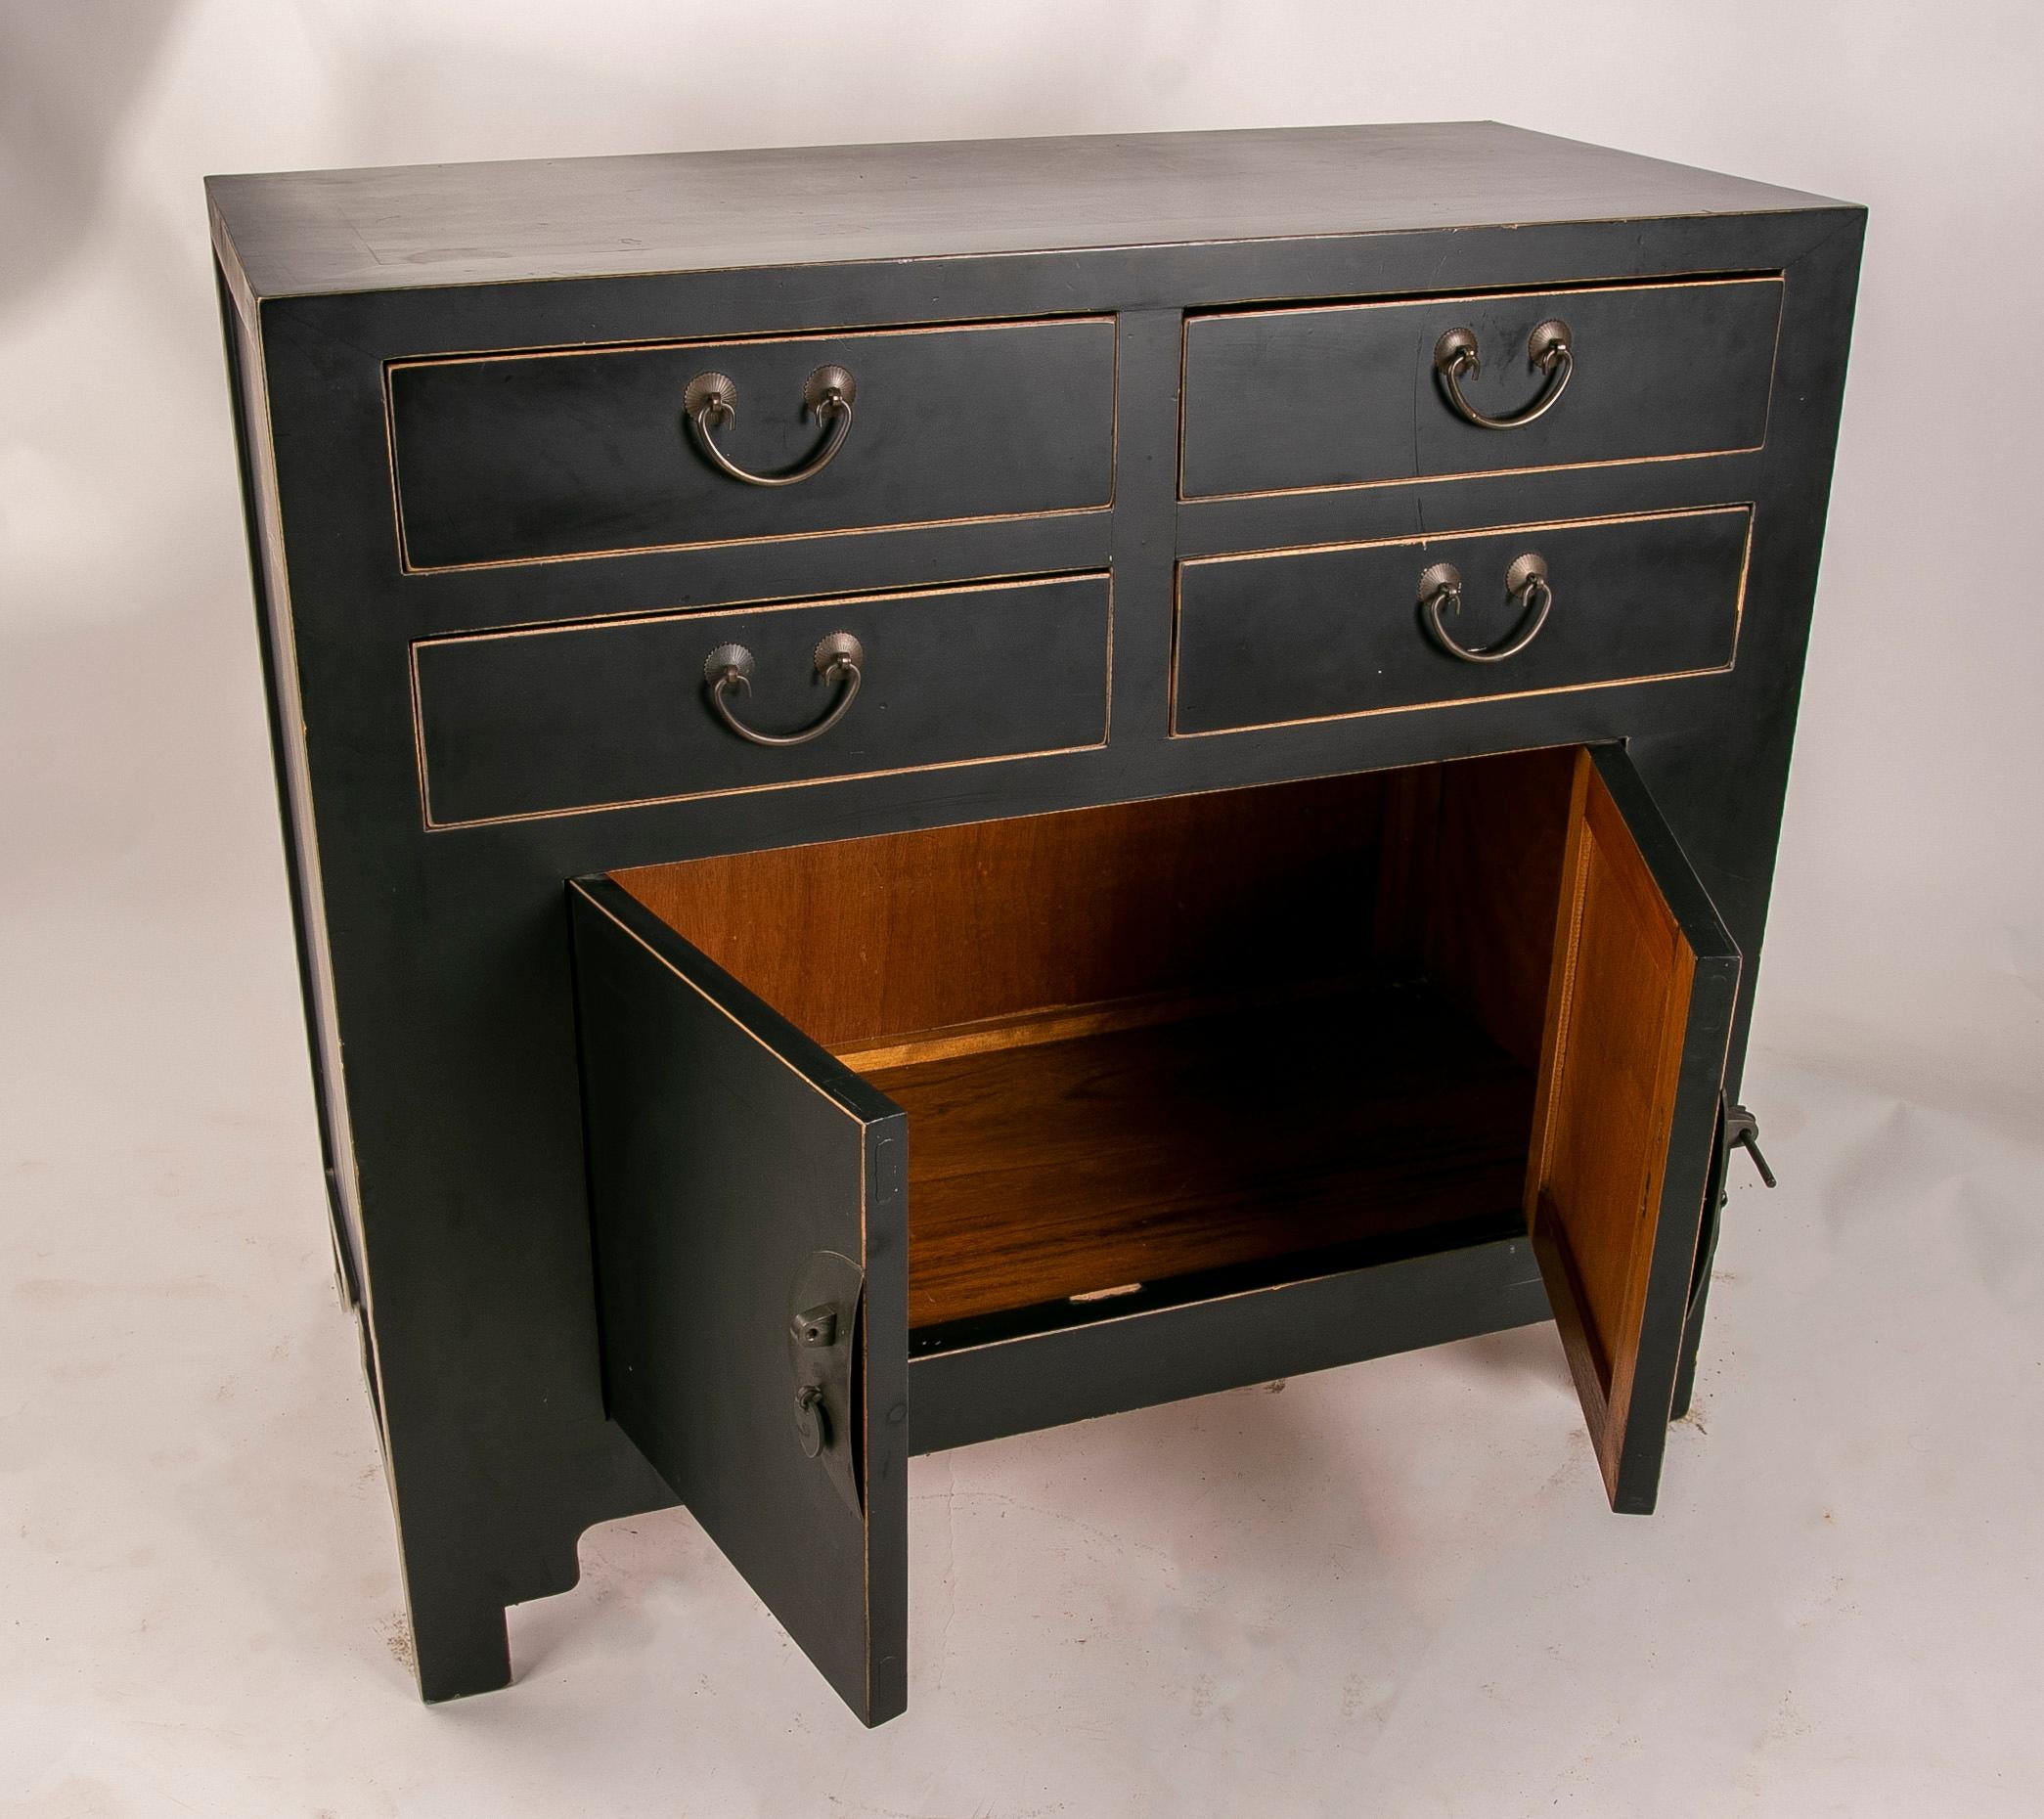 20th Century Chest of Drawers in Lacquered Wood with Drawers and Metal Pulls For Sale